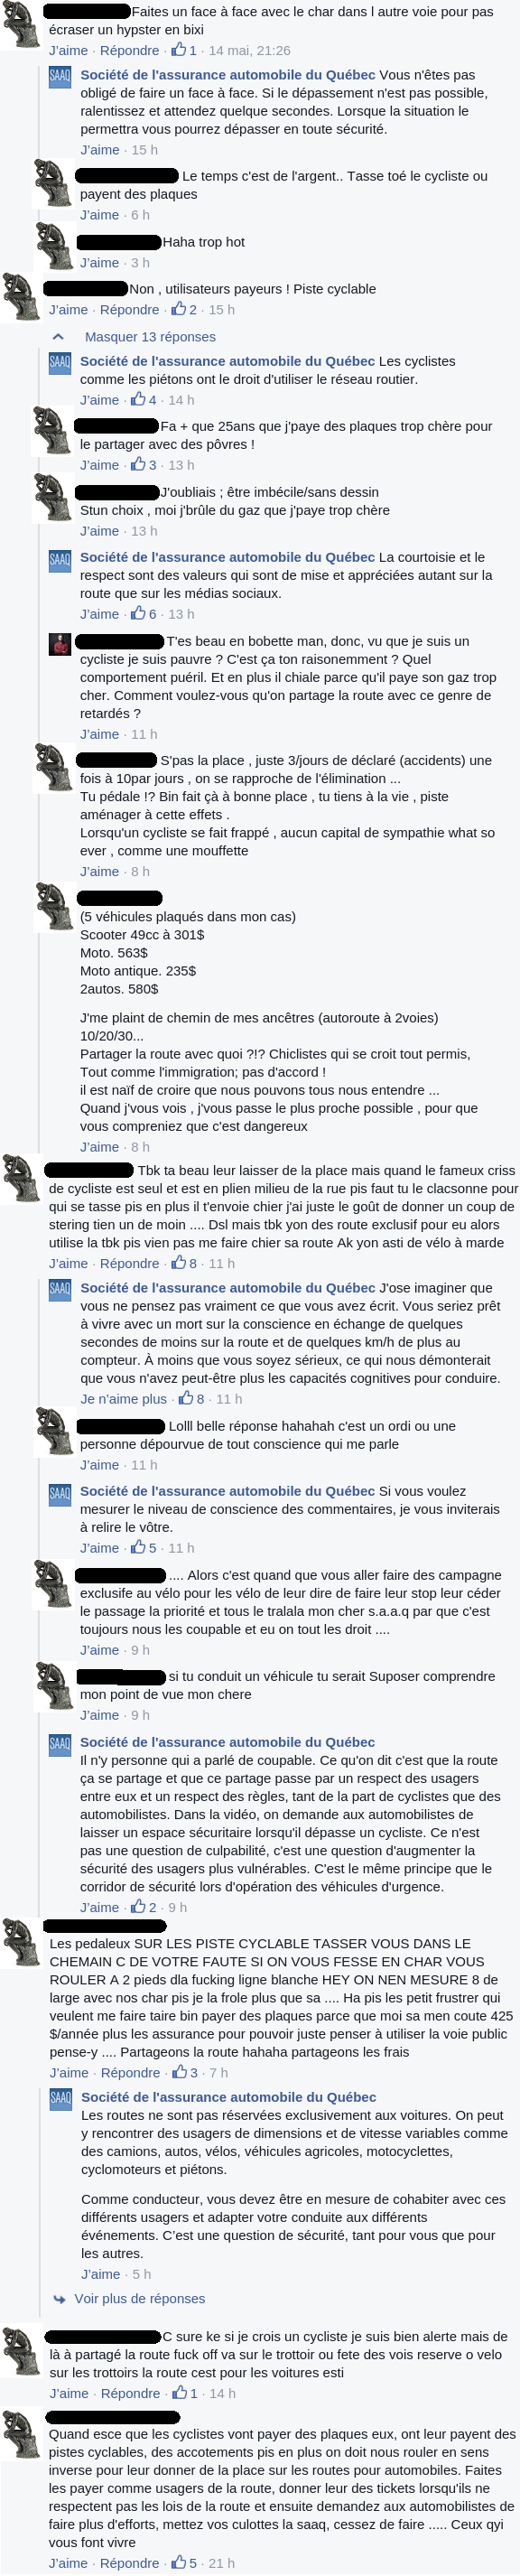 commentaires_saaq.png